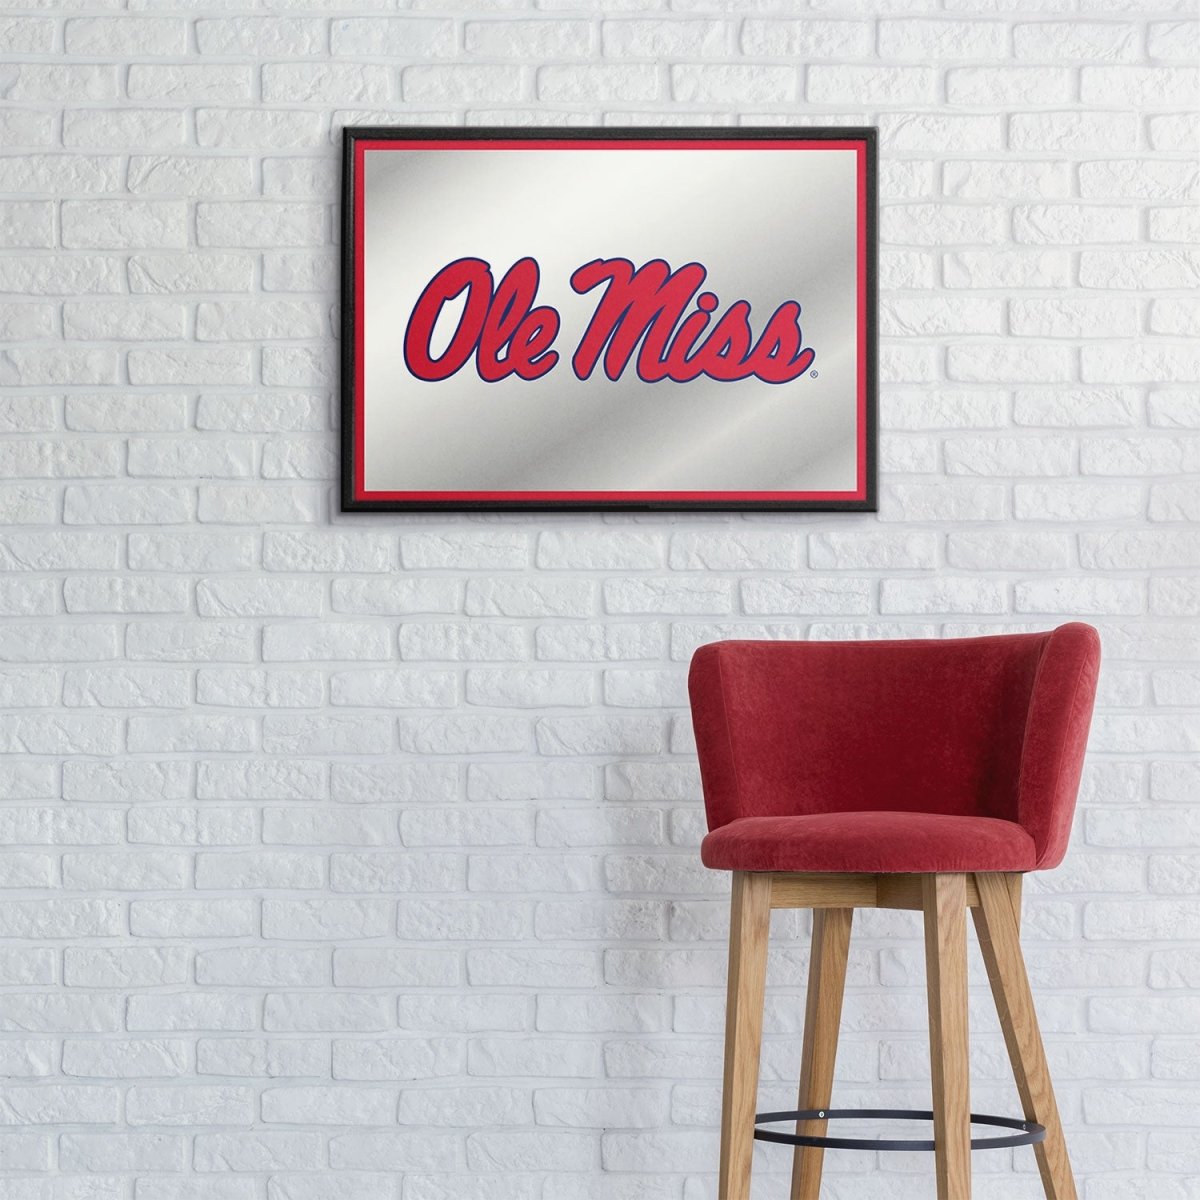 Ole Miss Rebels: Framed Mirrored Wall Sign - The Fan-Brand